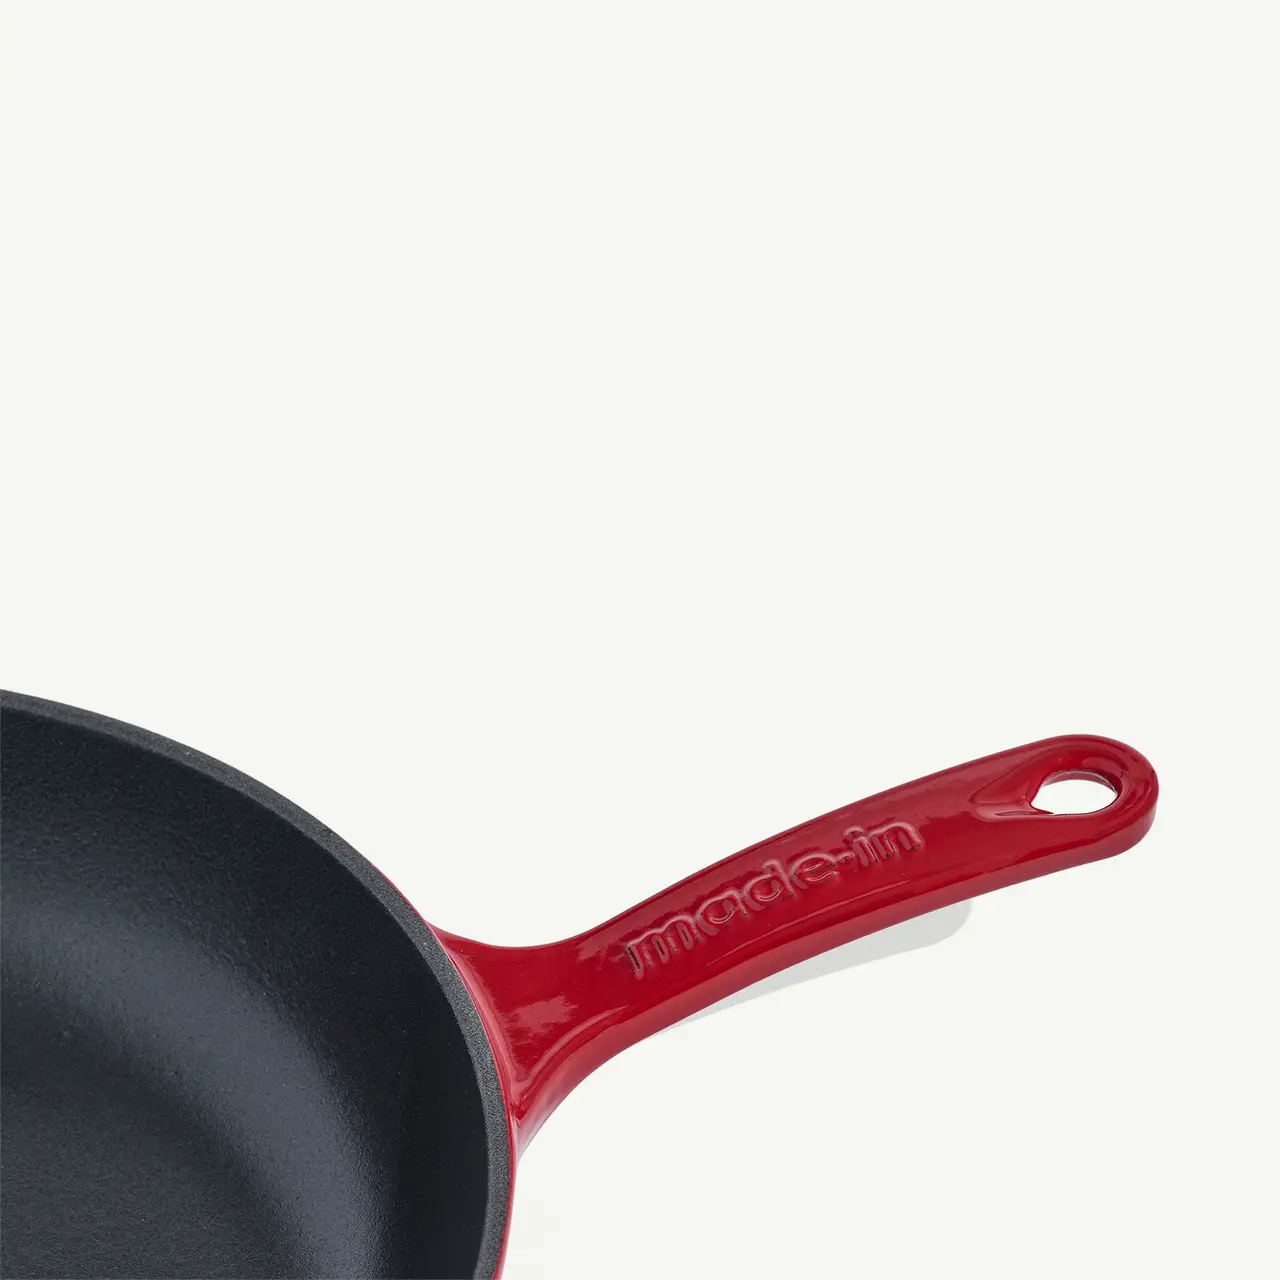 A black non-stick frying pan with a glossy red handle that has the text "made in" printed on it is shown against a white background.